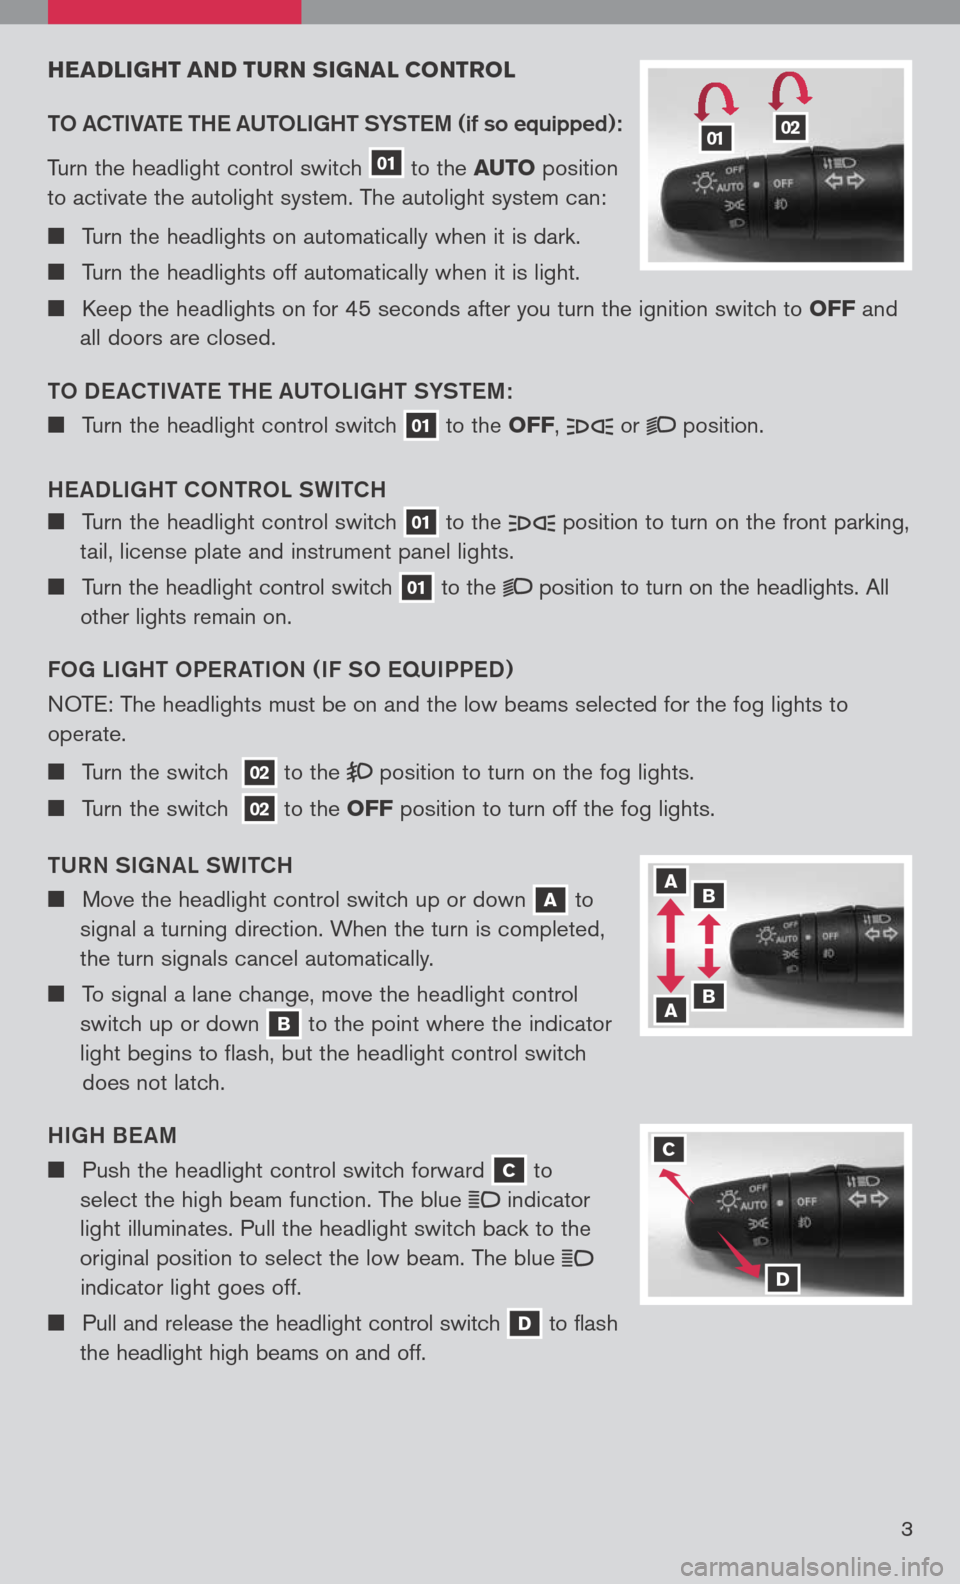 NISSAN TITAN 2008 1.G Quick Reference Guide 
3
HEADLIgHT AND T uRN  sIg NAL CONTROL
TO  aCTIV aTe  TH e a UTOLI gHT SYST eM 
(if so equipped):
Turn	 the	headlight	 control	switch
	01	
to	 the	 AuTO 	position	
to	 activate	 the	autolight	 system